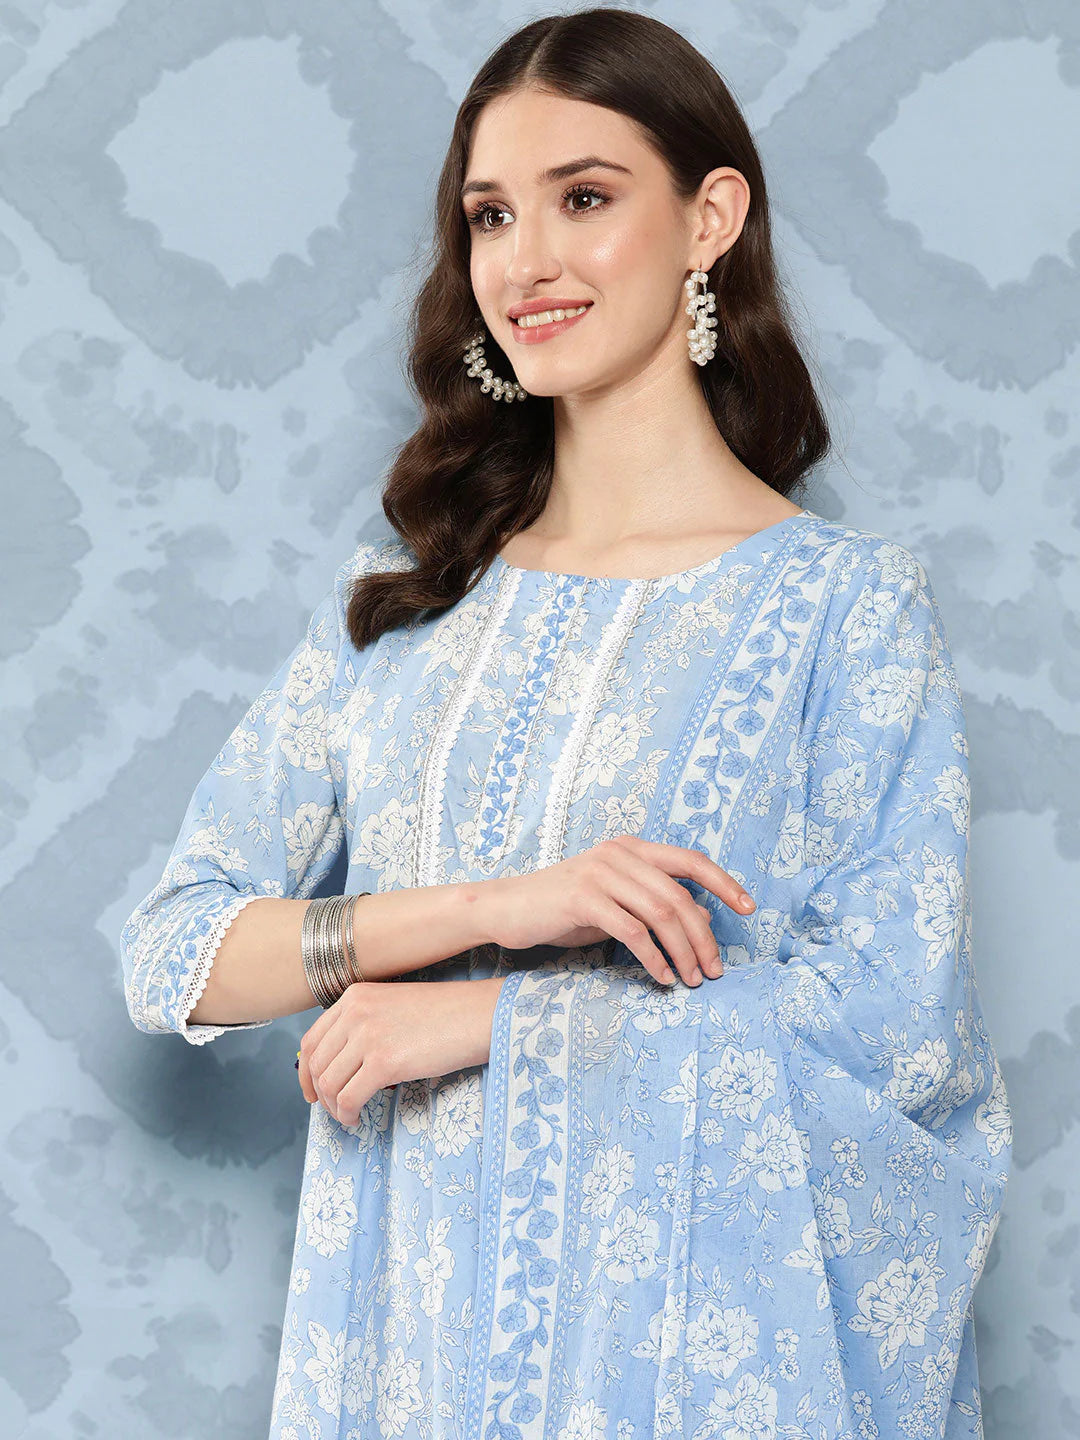 Blue & White Floral Printed Pure Cotton Flared Kurti With Pants & Dupatta